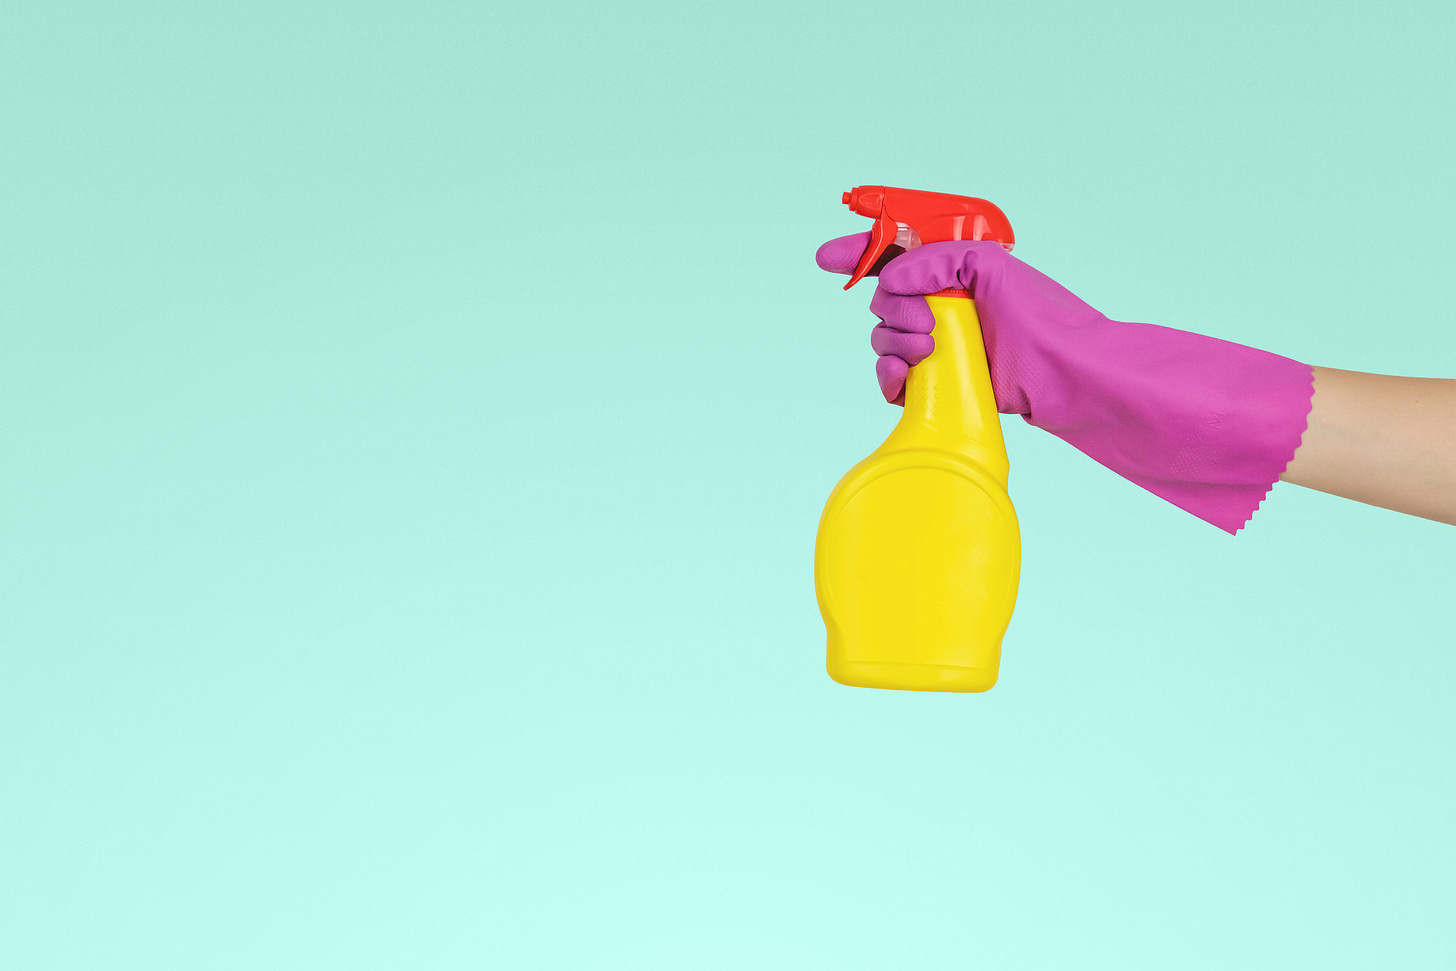 A hand wearing a purple rubber glove and holding a yellow and red spray bottle against a teal background